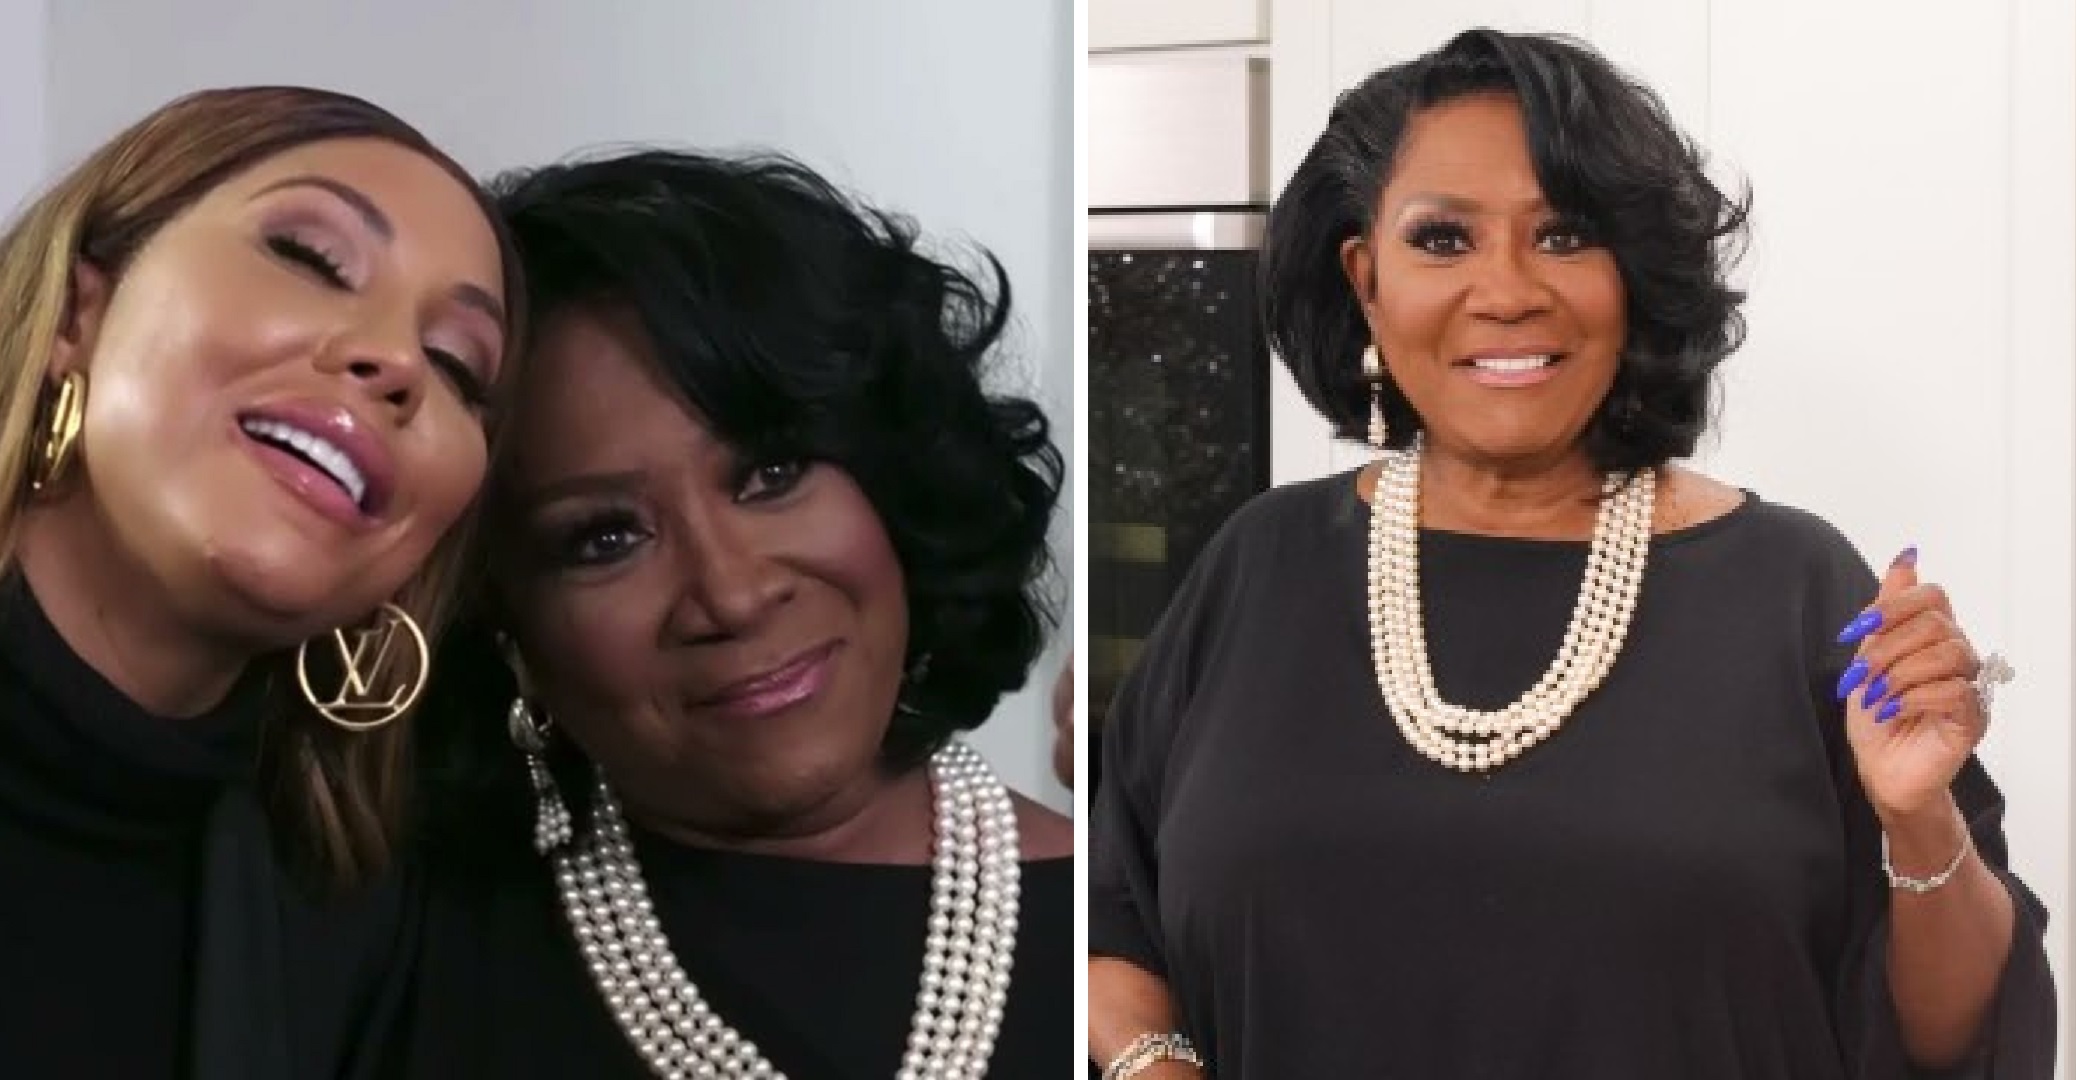 Watch: Patti LaBelle Belts Out ‘Silent Night’ With Tamar Braxton For The Holidays